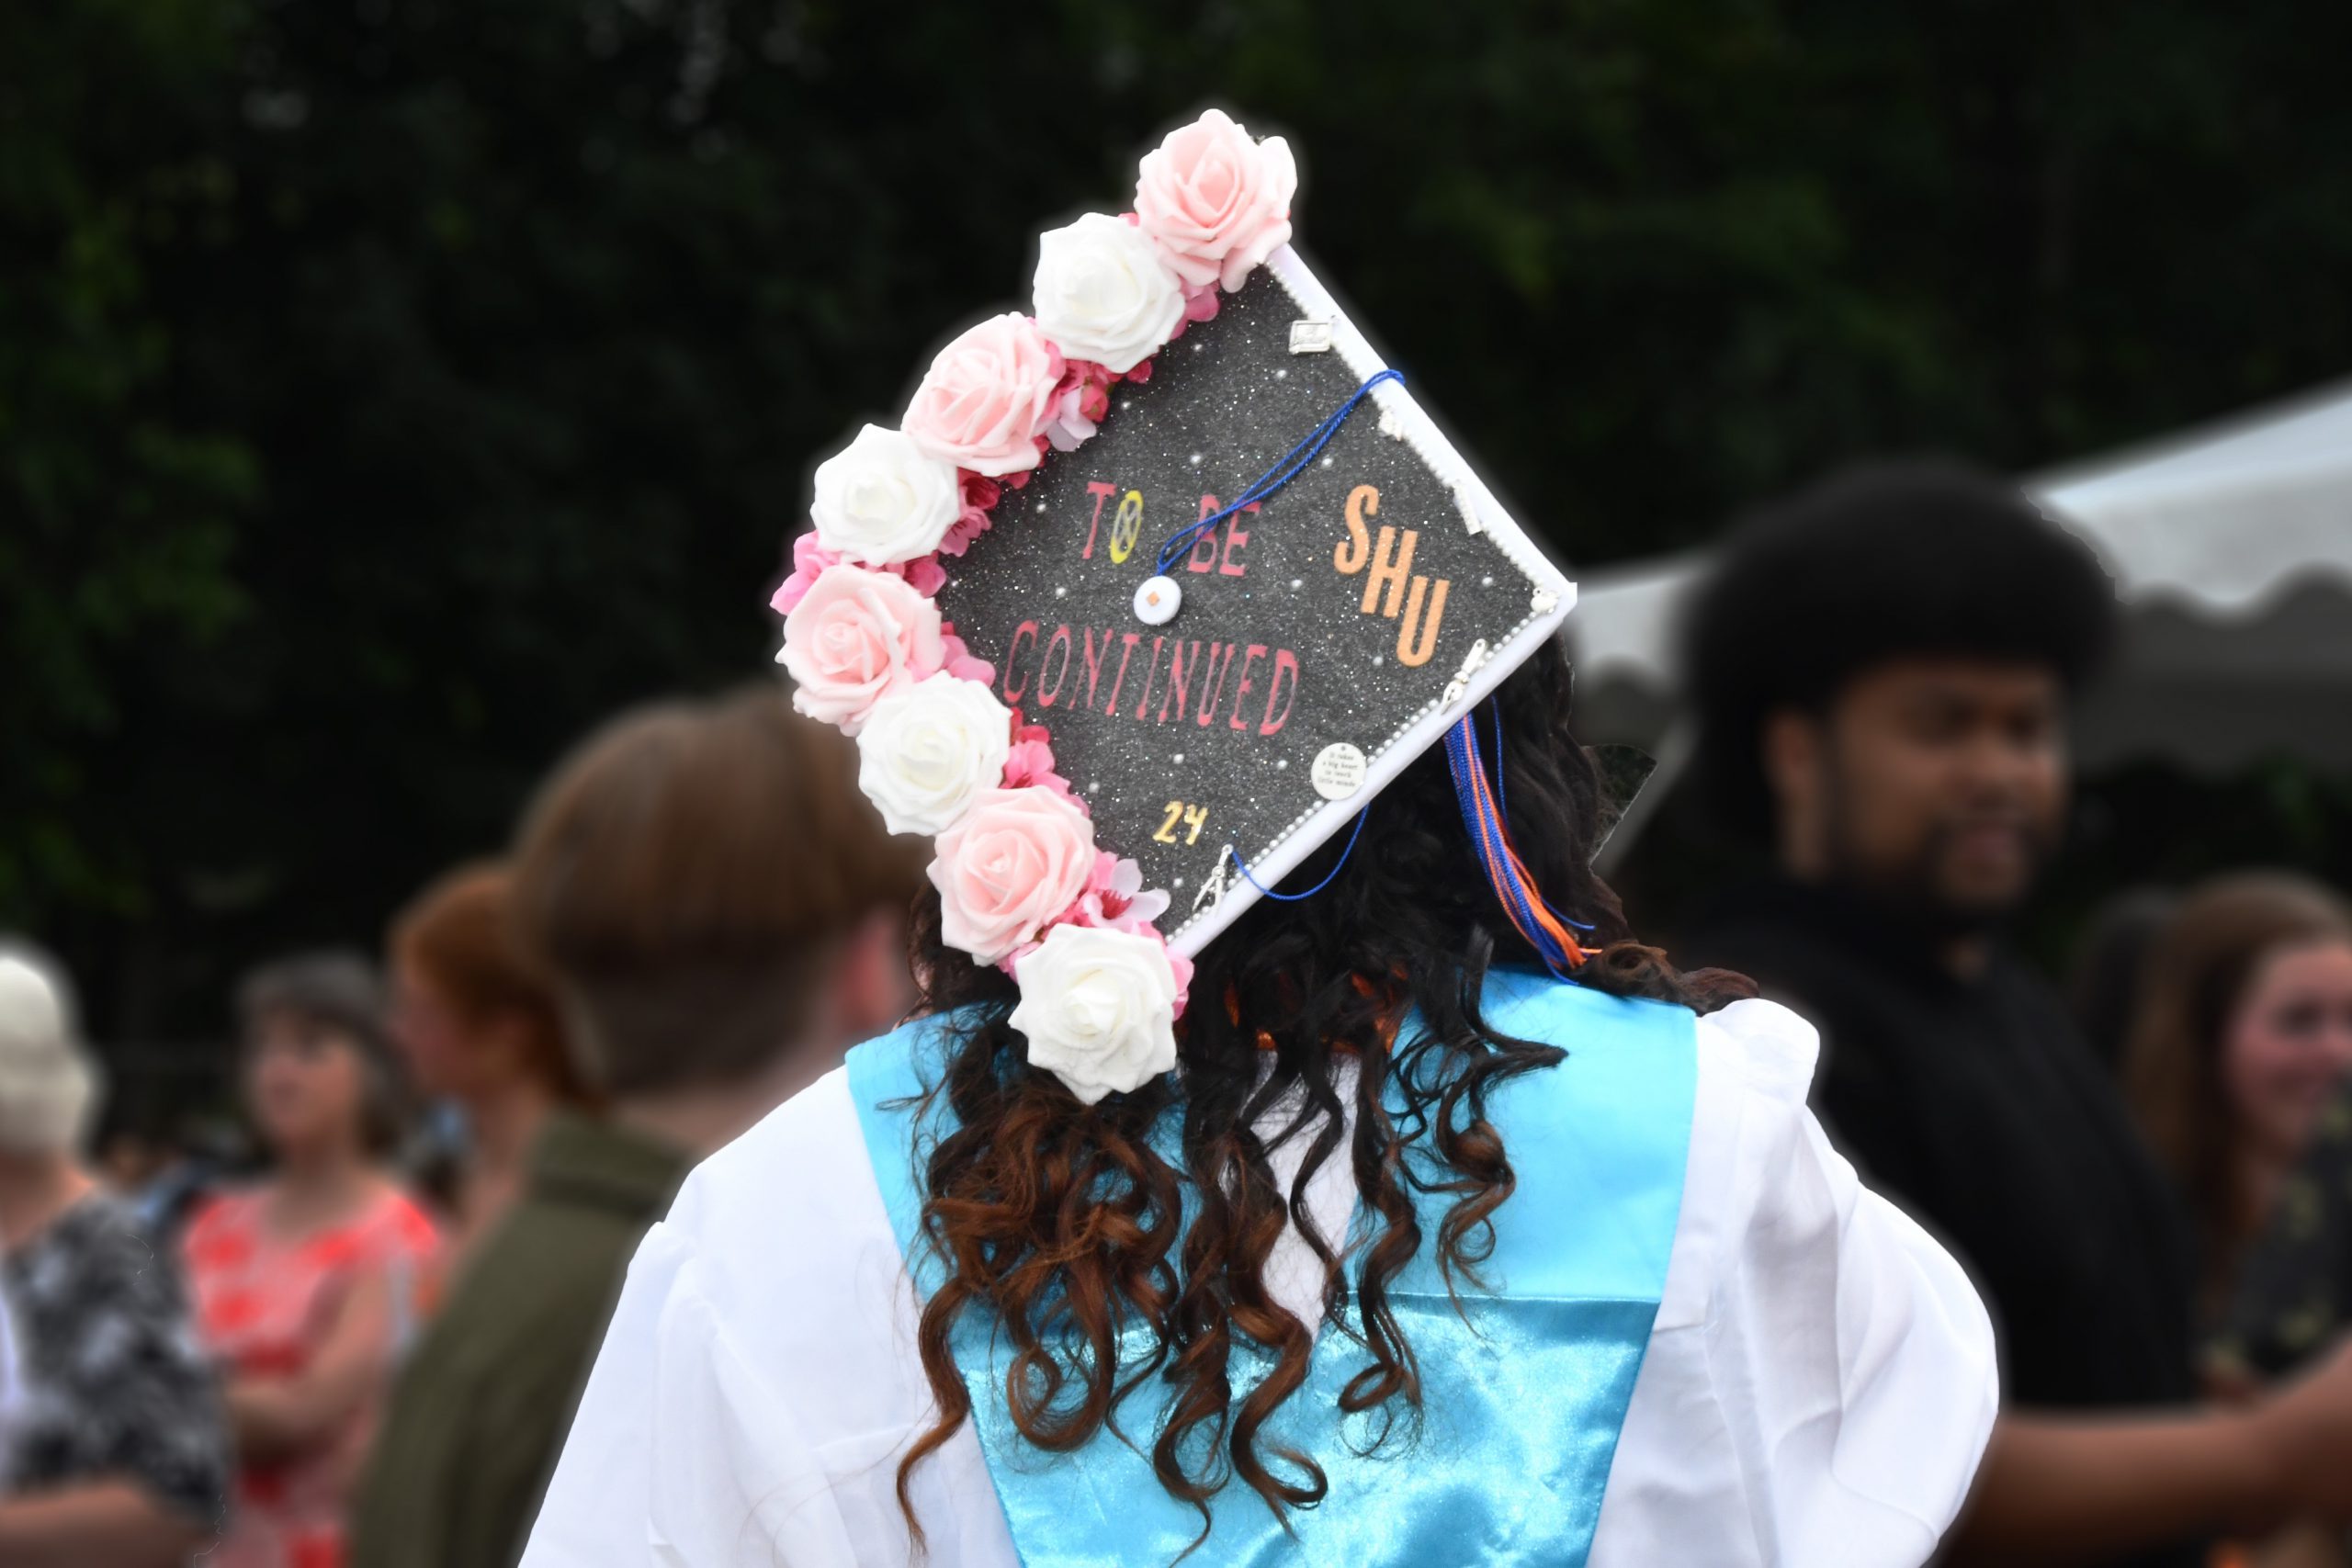 student wears graduation cap with flowers. It says "to be continued SHU"